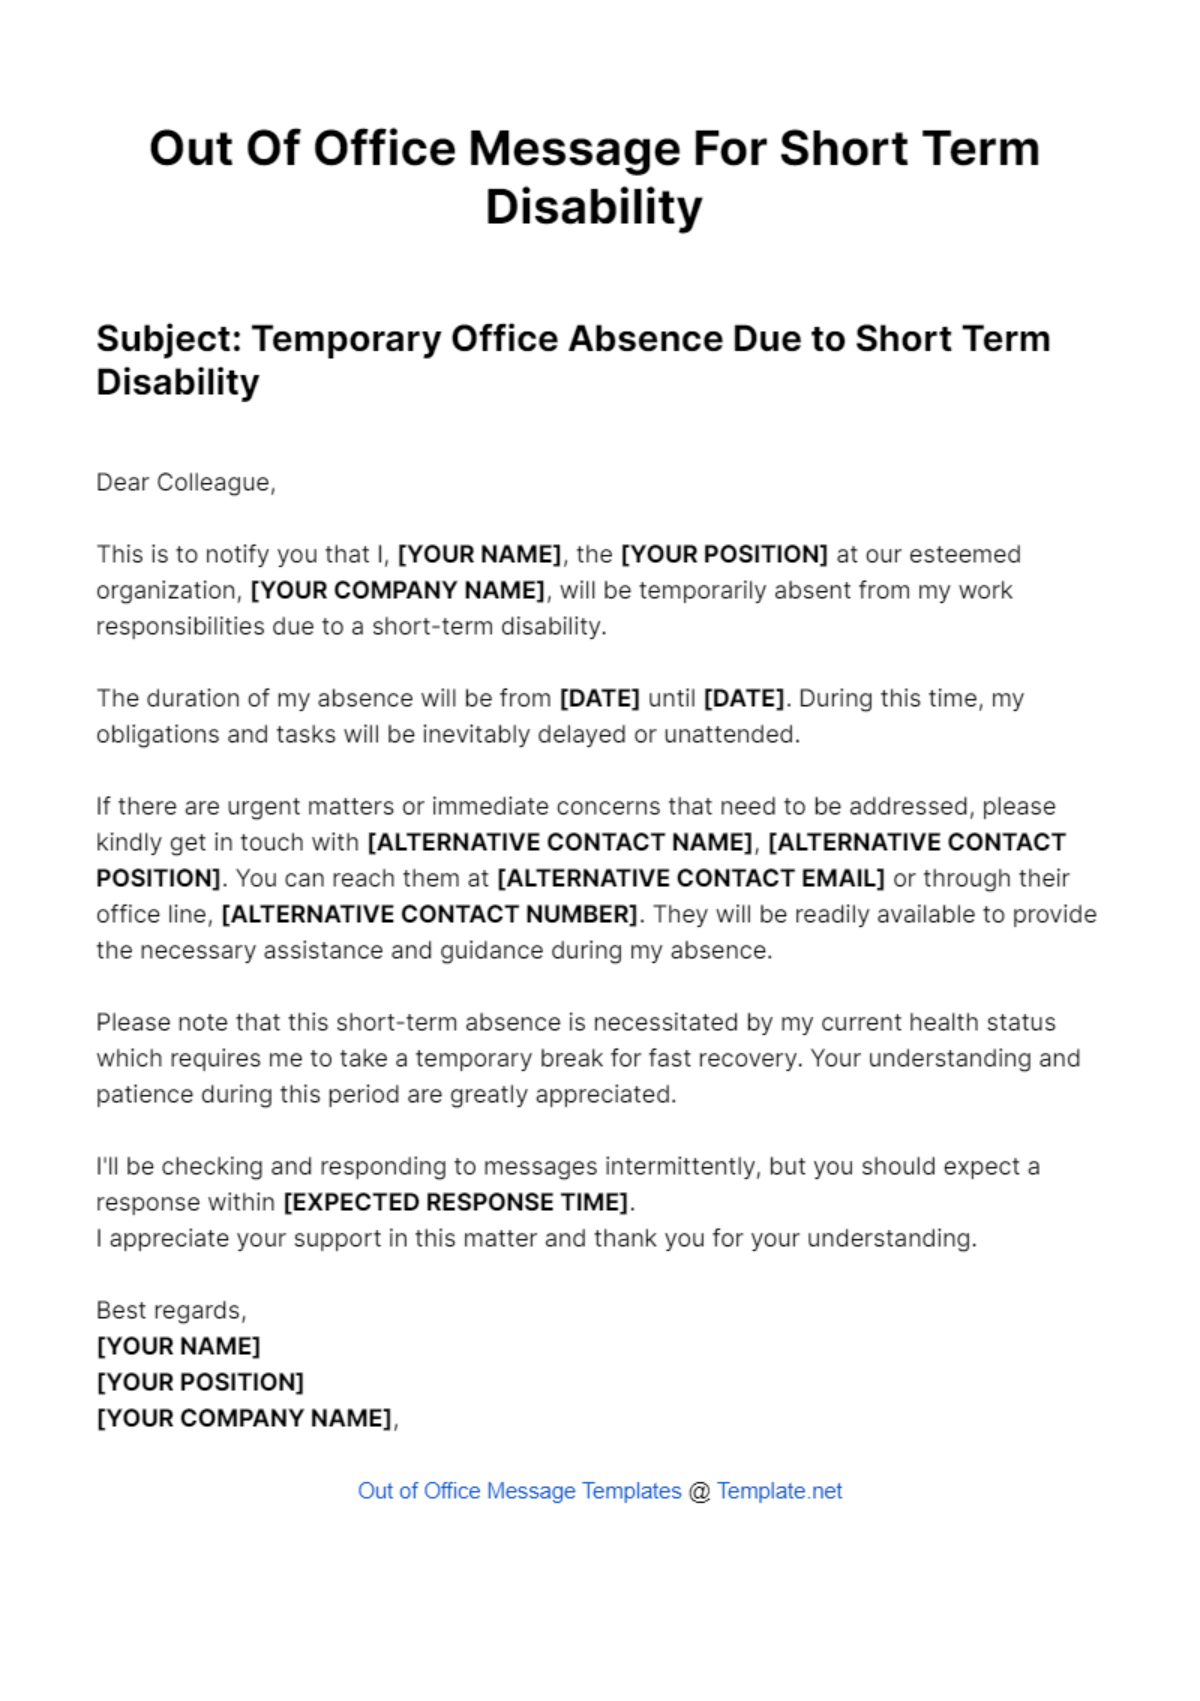 Out Of Office Message For Short Term Disability Template